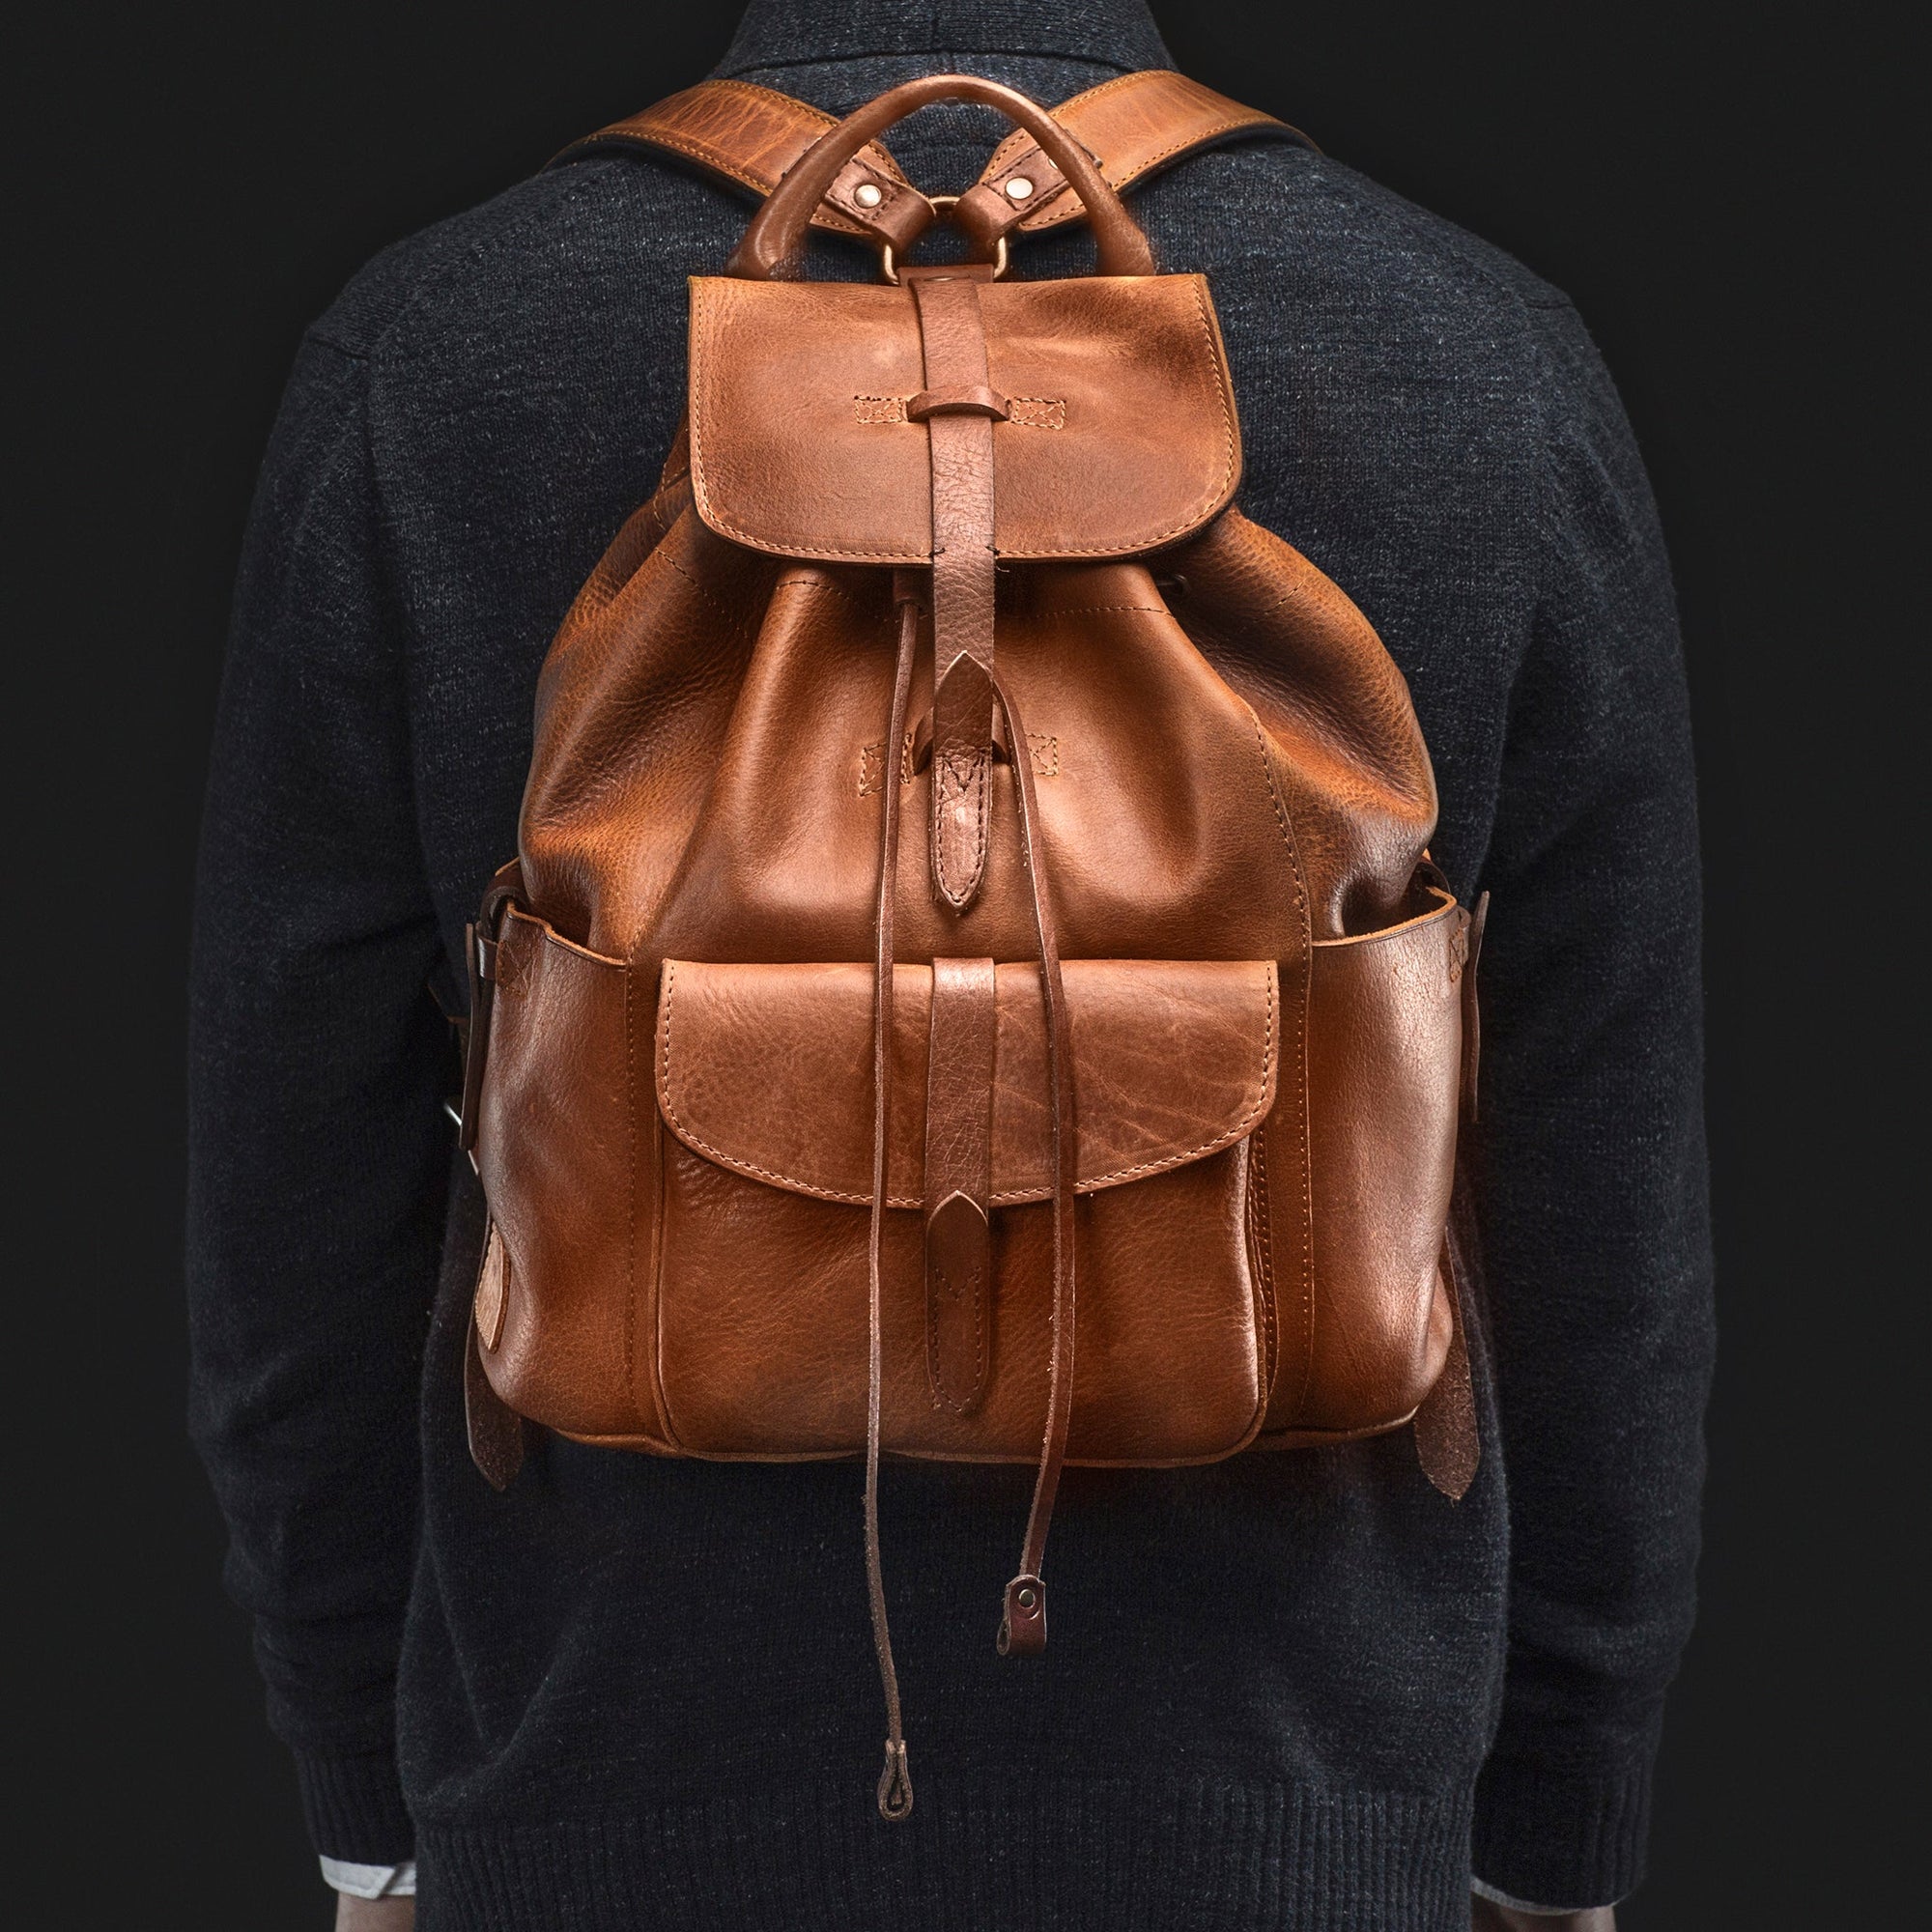 Rainier Leather Backpack in Tan by Will Leather Goods